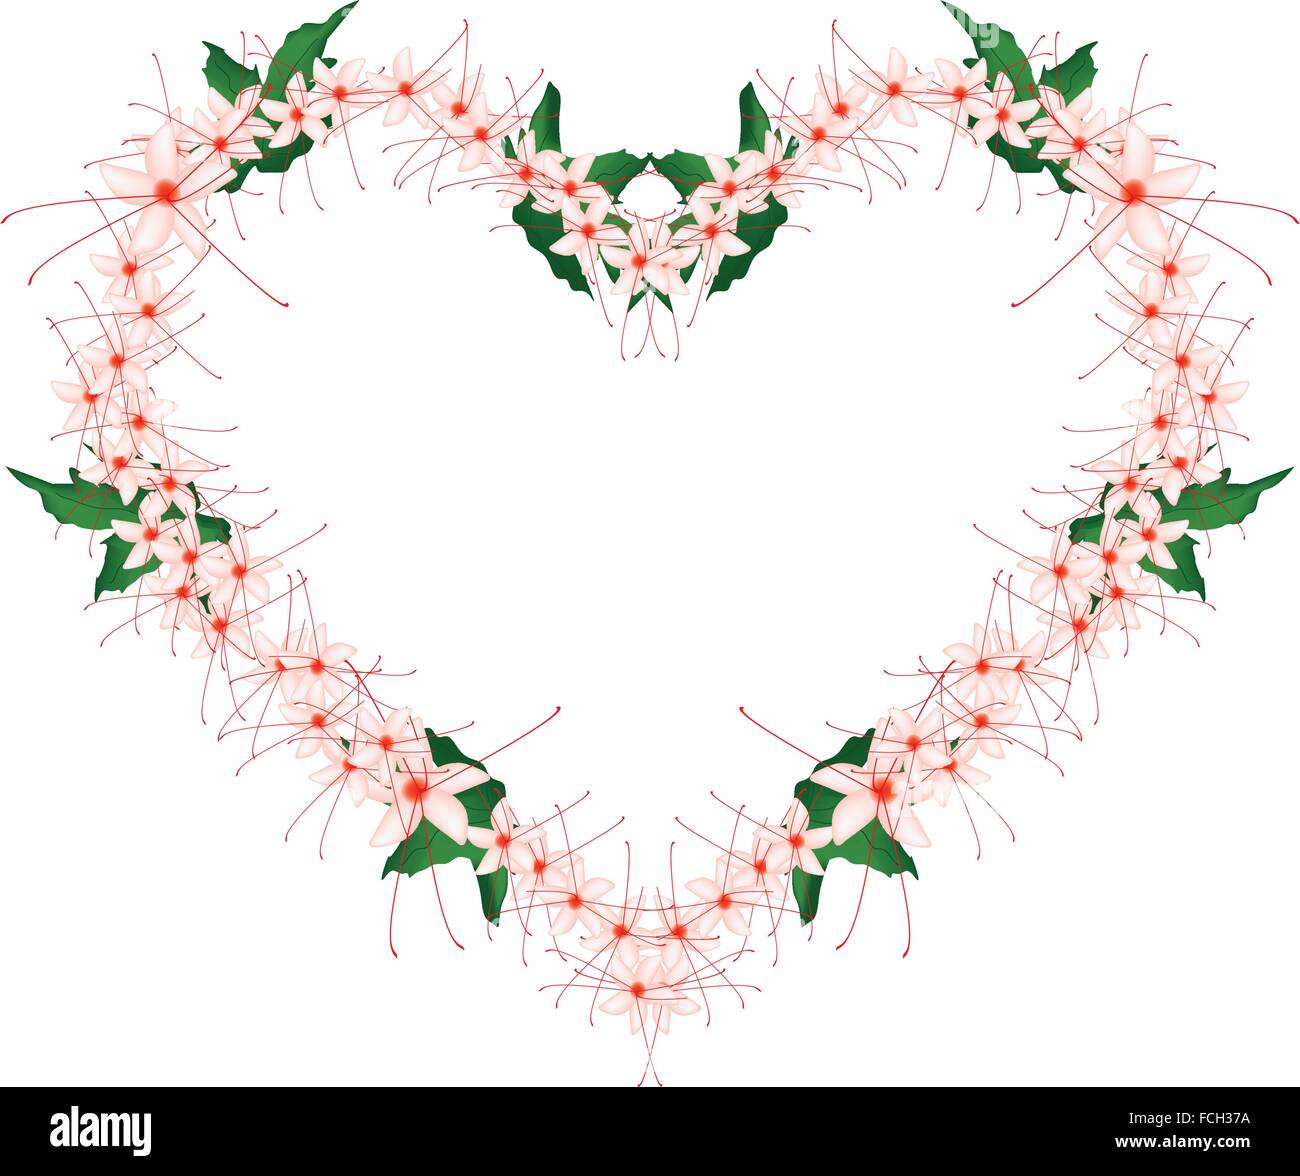 Love Concept, Illustration of Red Clerodendrum Paniculatum Flowers or Pagoda Flowers Forming in Heart Shape Frame Isolated on Wh Stock Vector